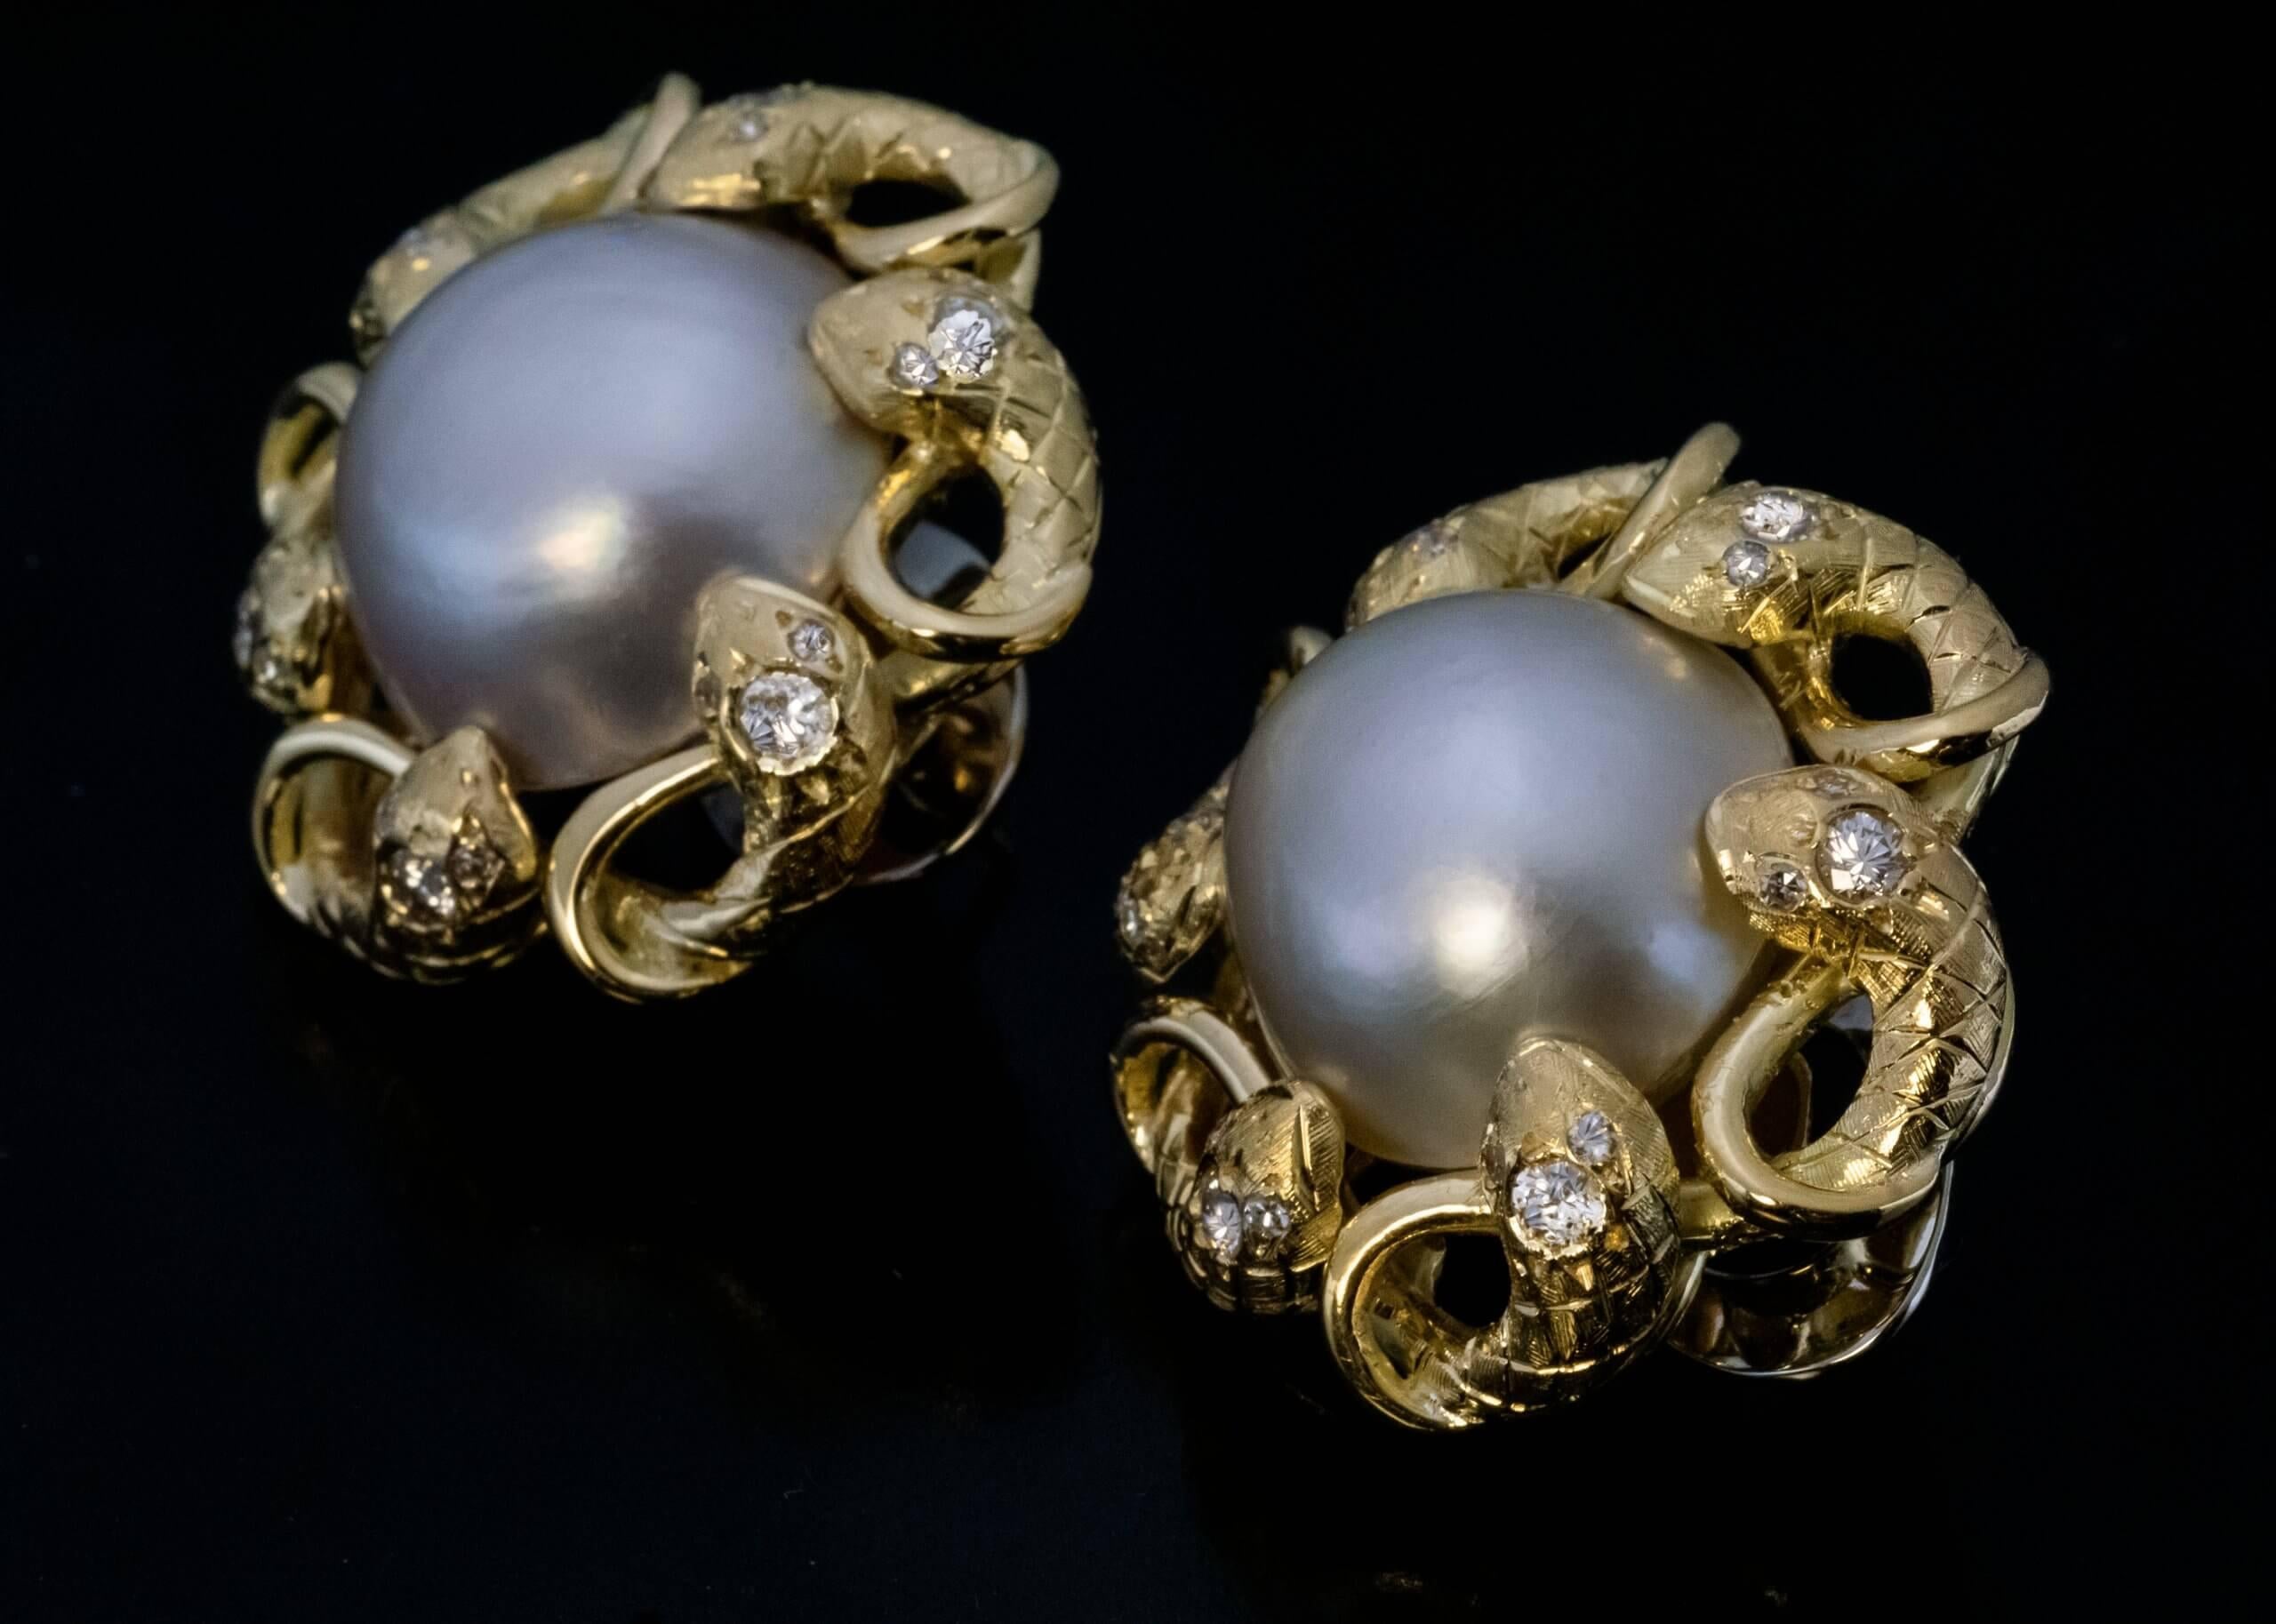 Circa 1960s  These finely crafted 18K yellow and white (omega clips) gold snake motif earrings are centered with two mabe pearls. The pearls are surrounded by hand engraved coiled snakes embellished with diamonds.  Estimated total diamond weight is